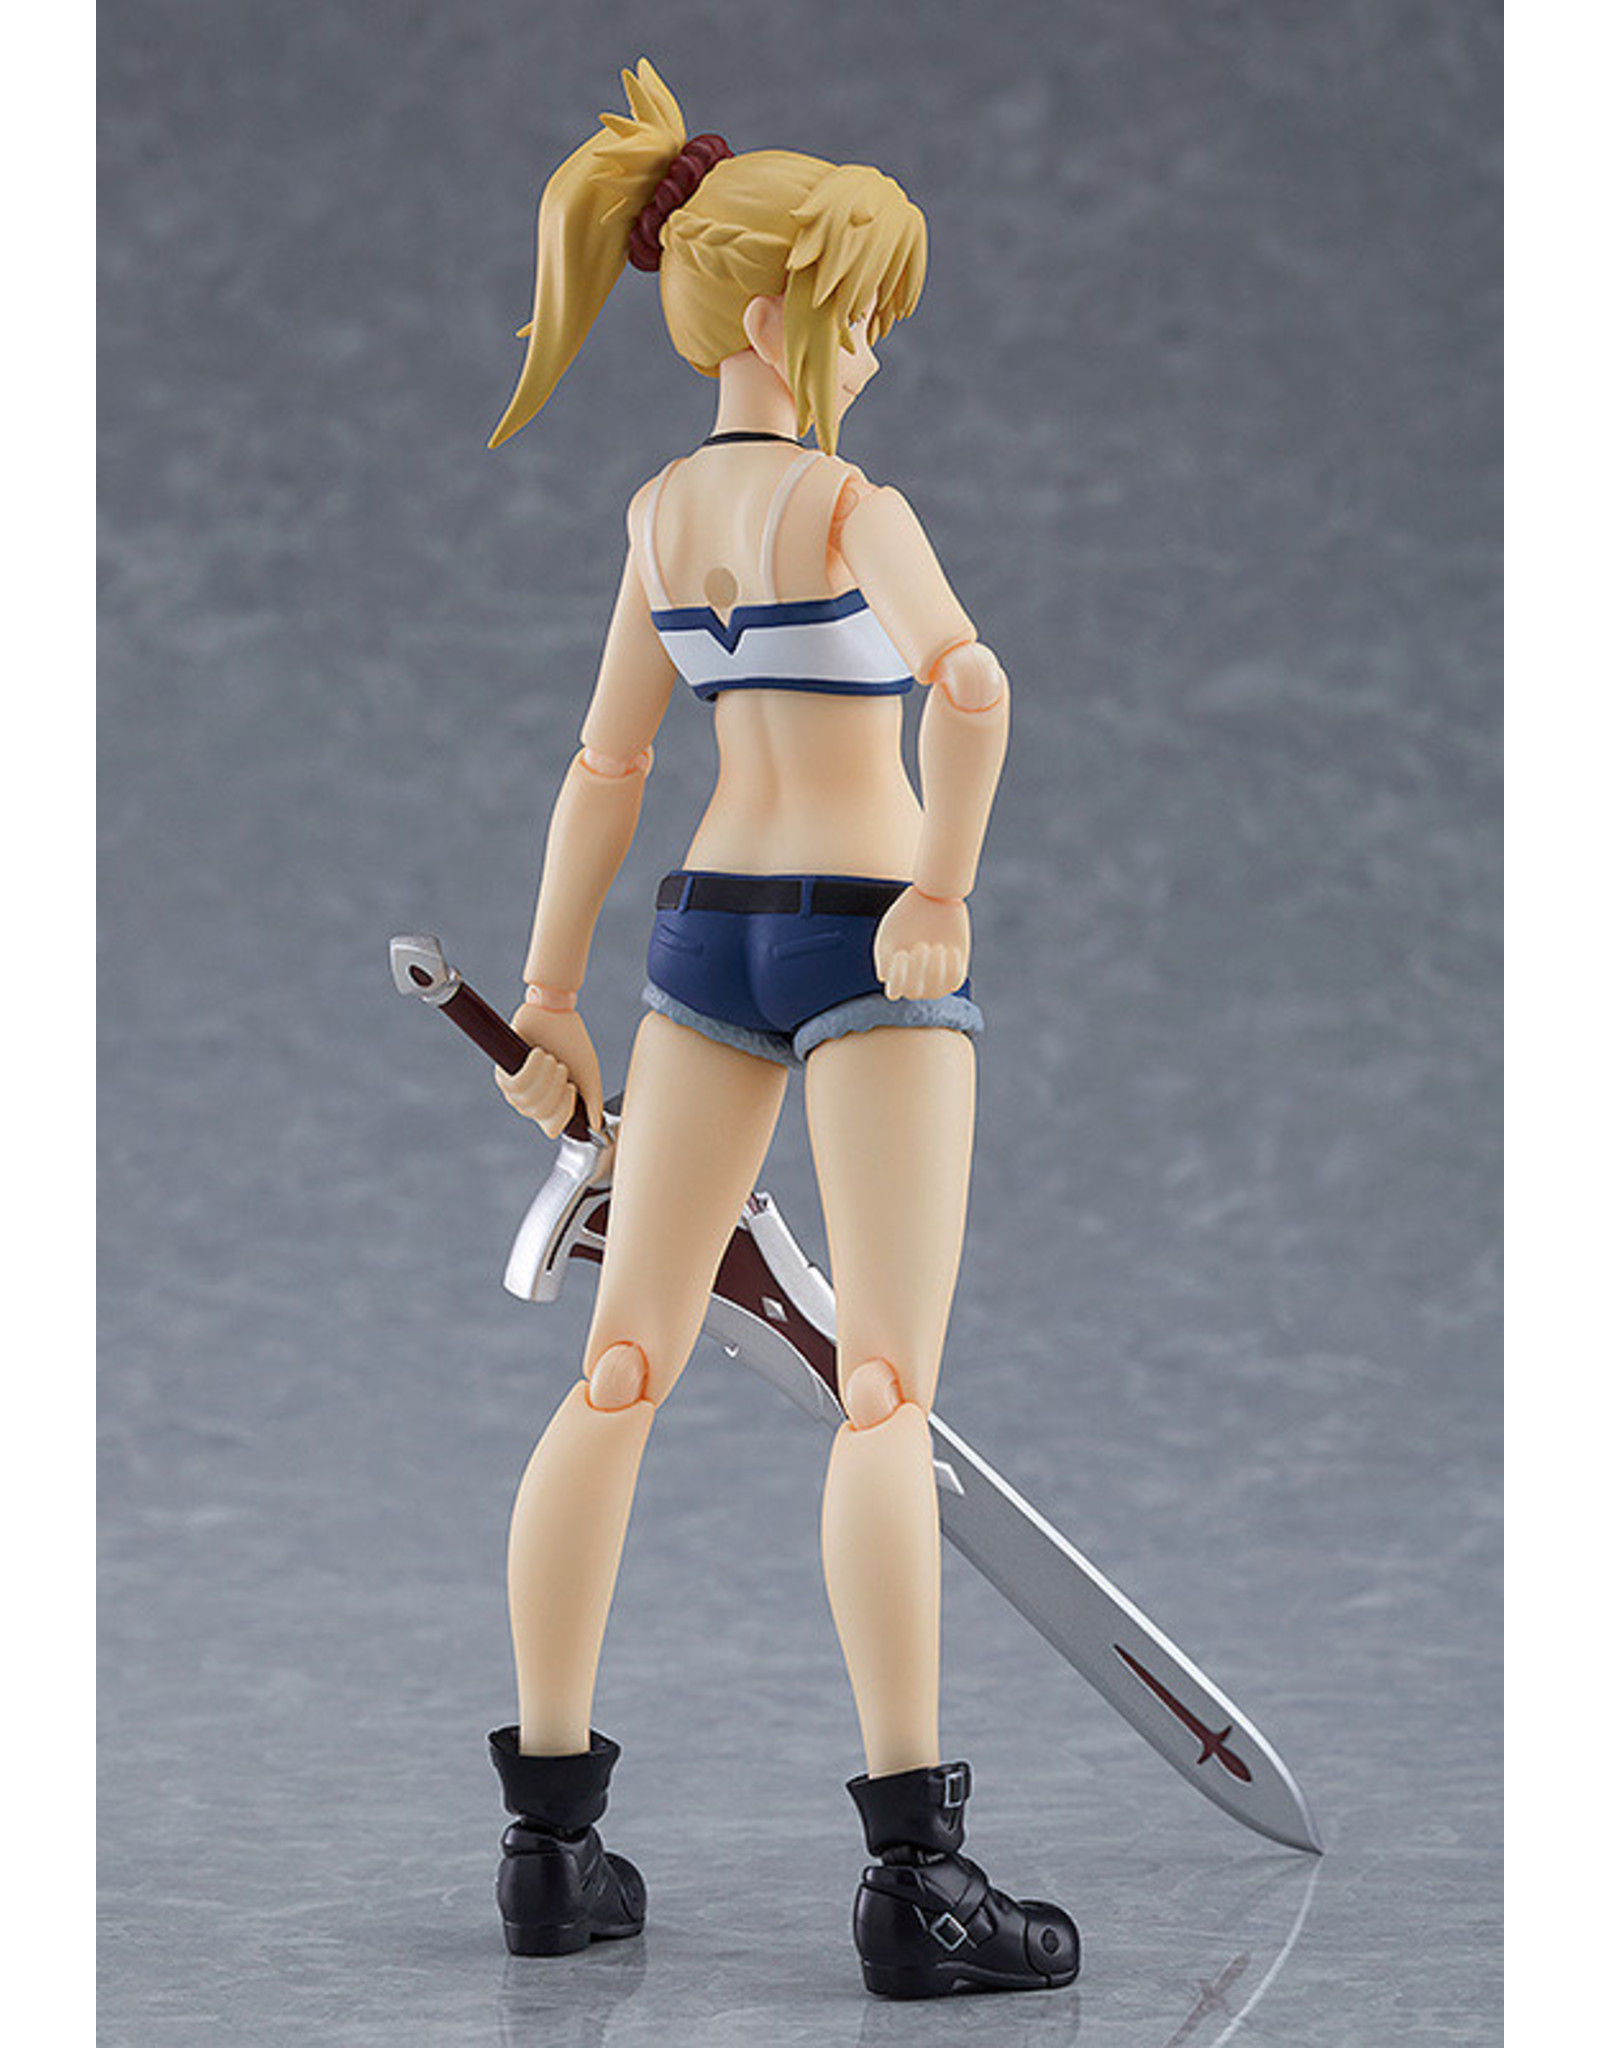 Figma #474 Saber of "Red" Casual Ver.